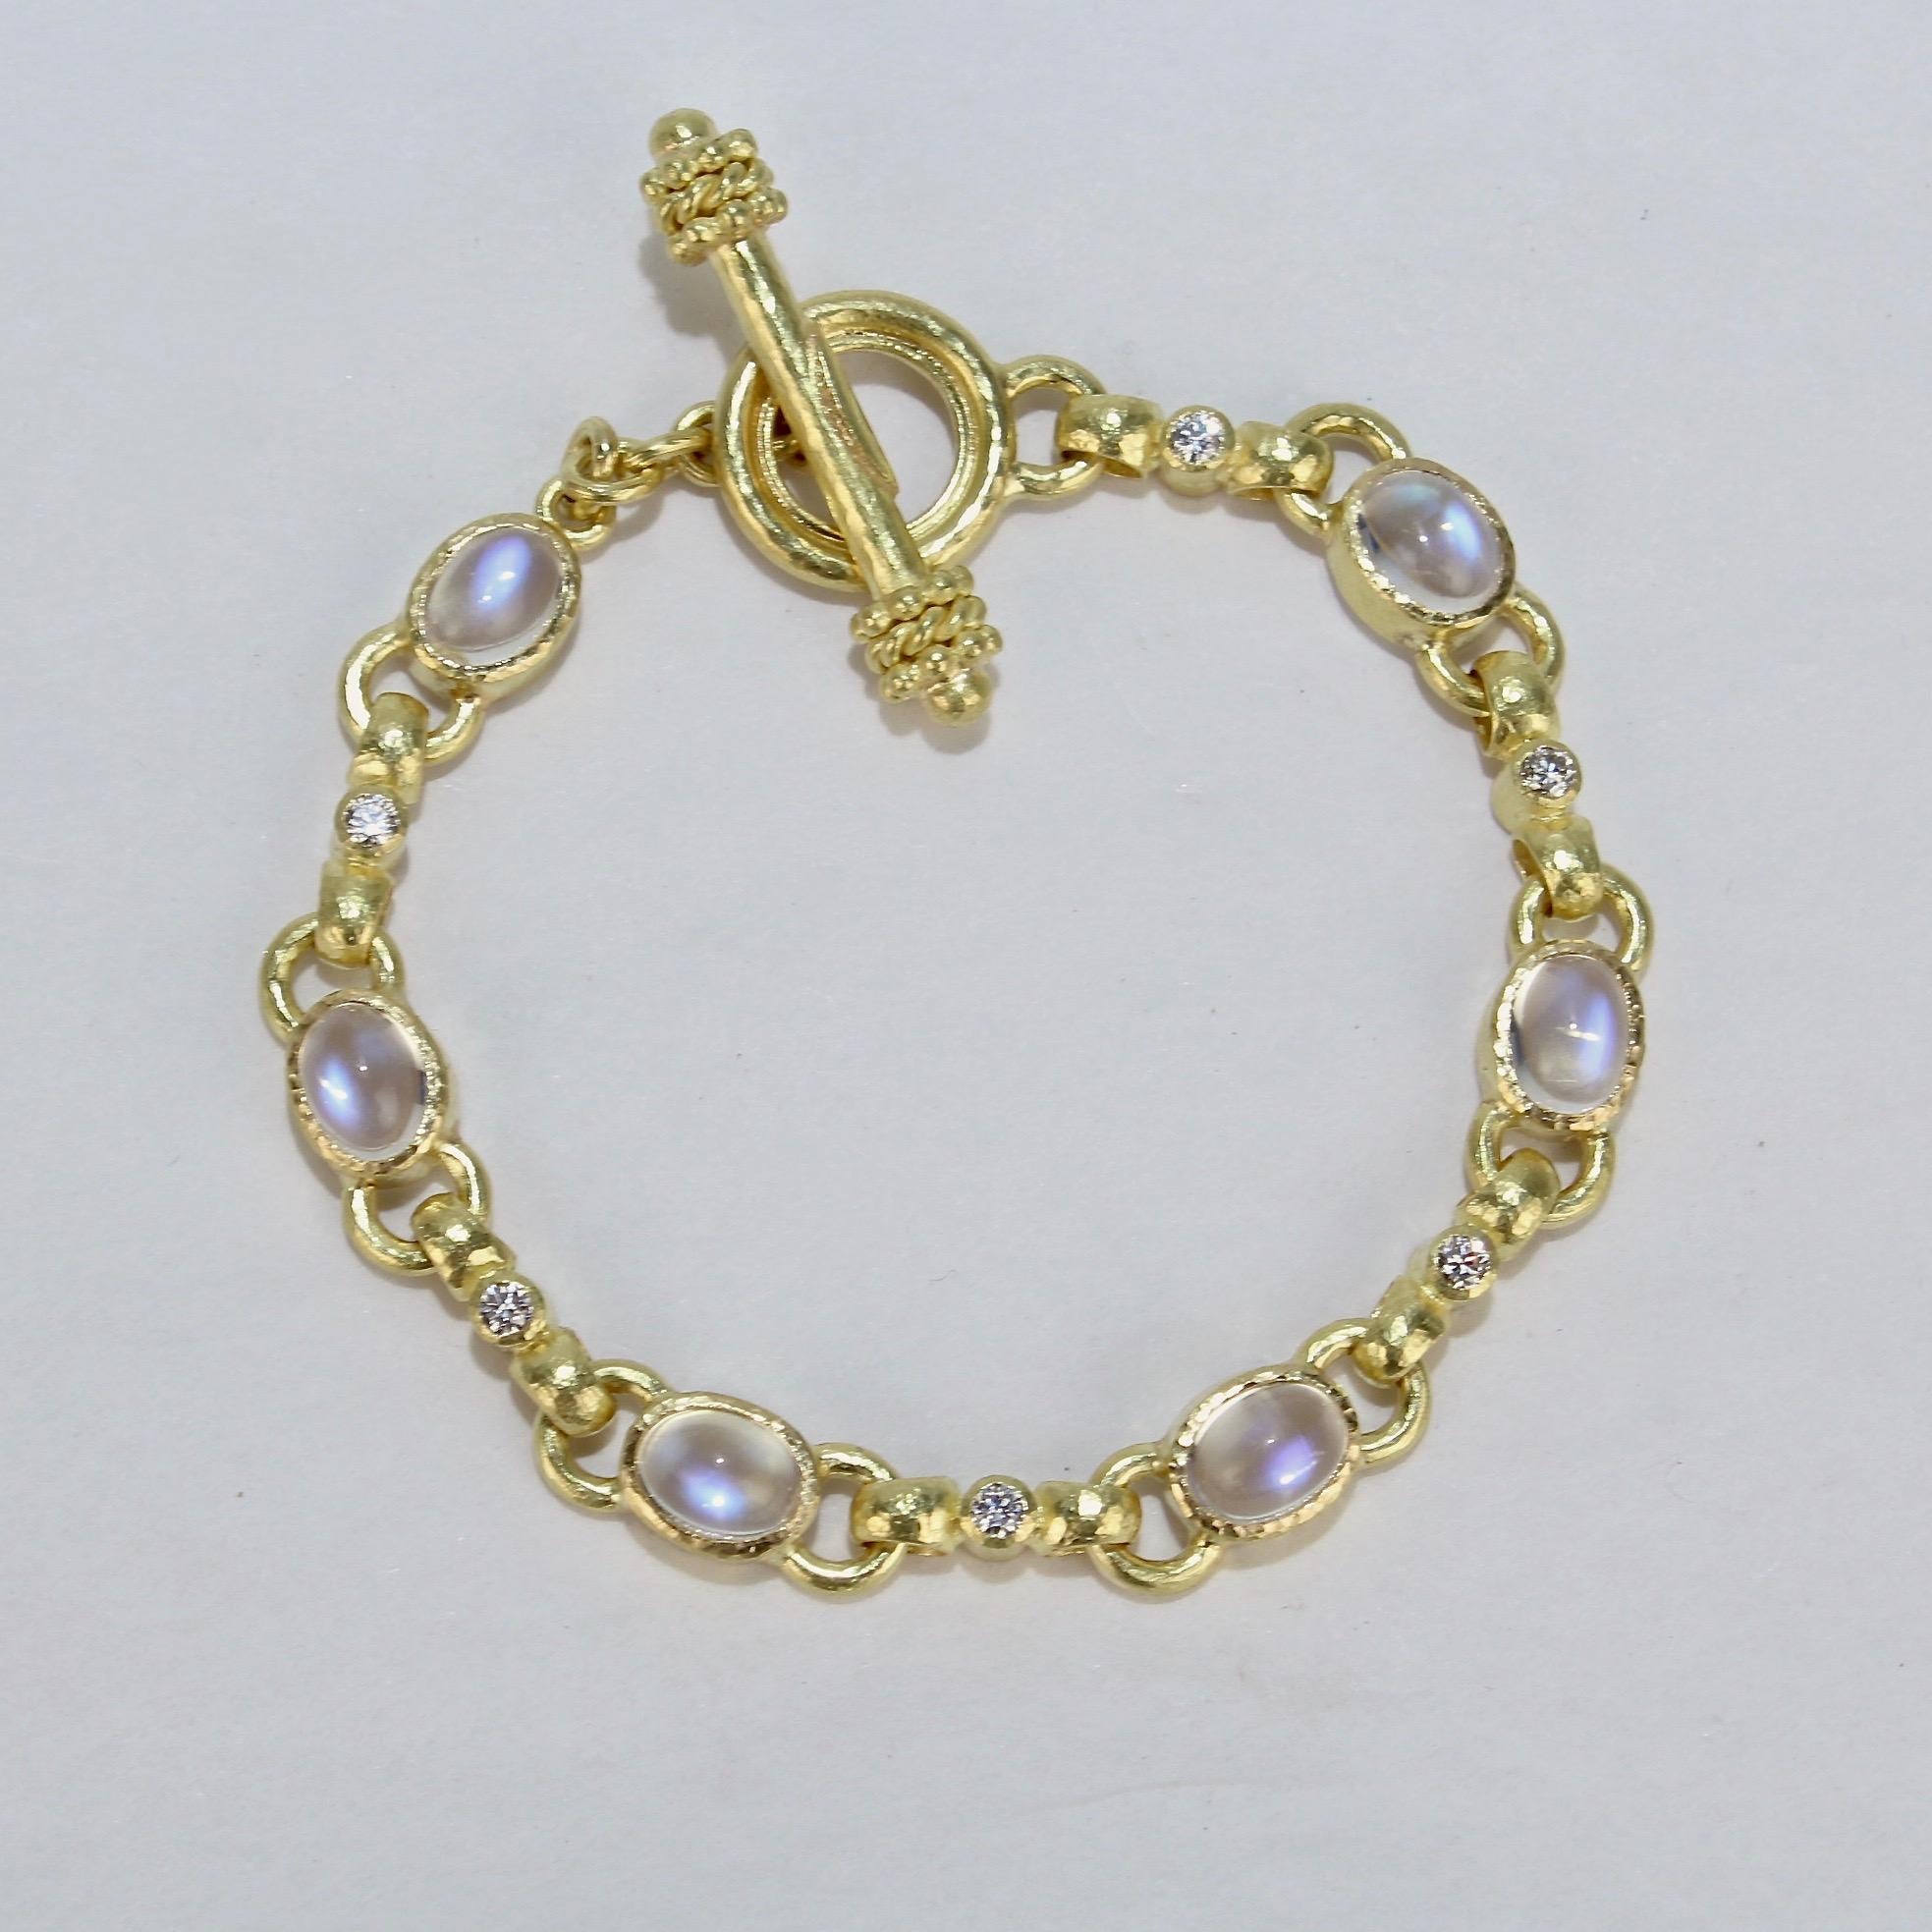 A very fine Elizabeth Locke fancy-link toggle bracelet.

With hand hammered fancy links in burnished gold set with 6 moonstone cabochon gemstones and 6 round cut white diamonds.

It feels simply wonderful on the arm!

Marked to the T bar with the EL